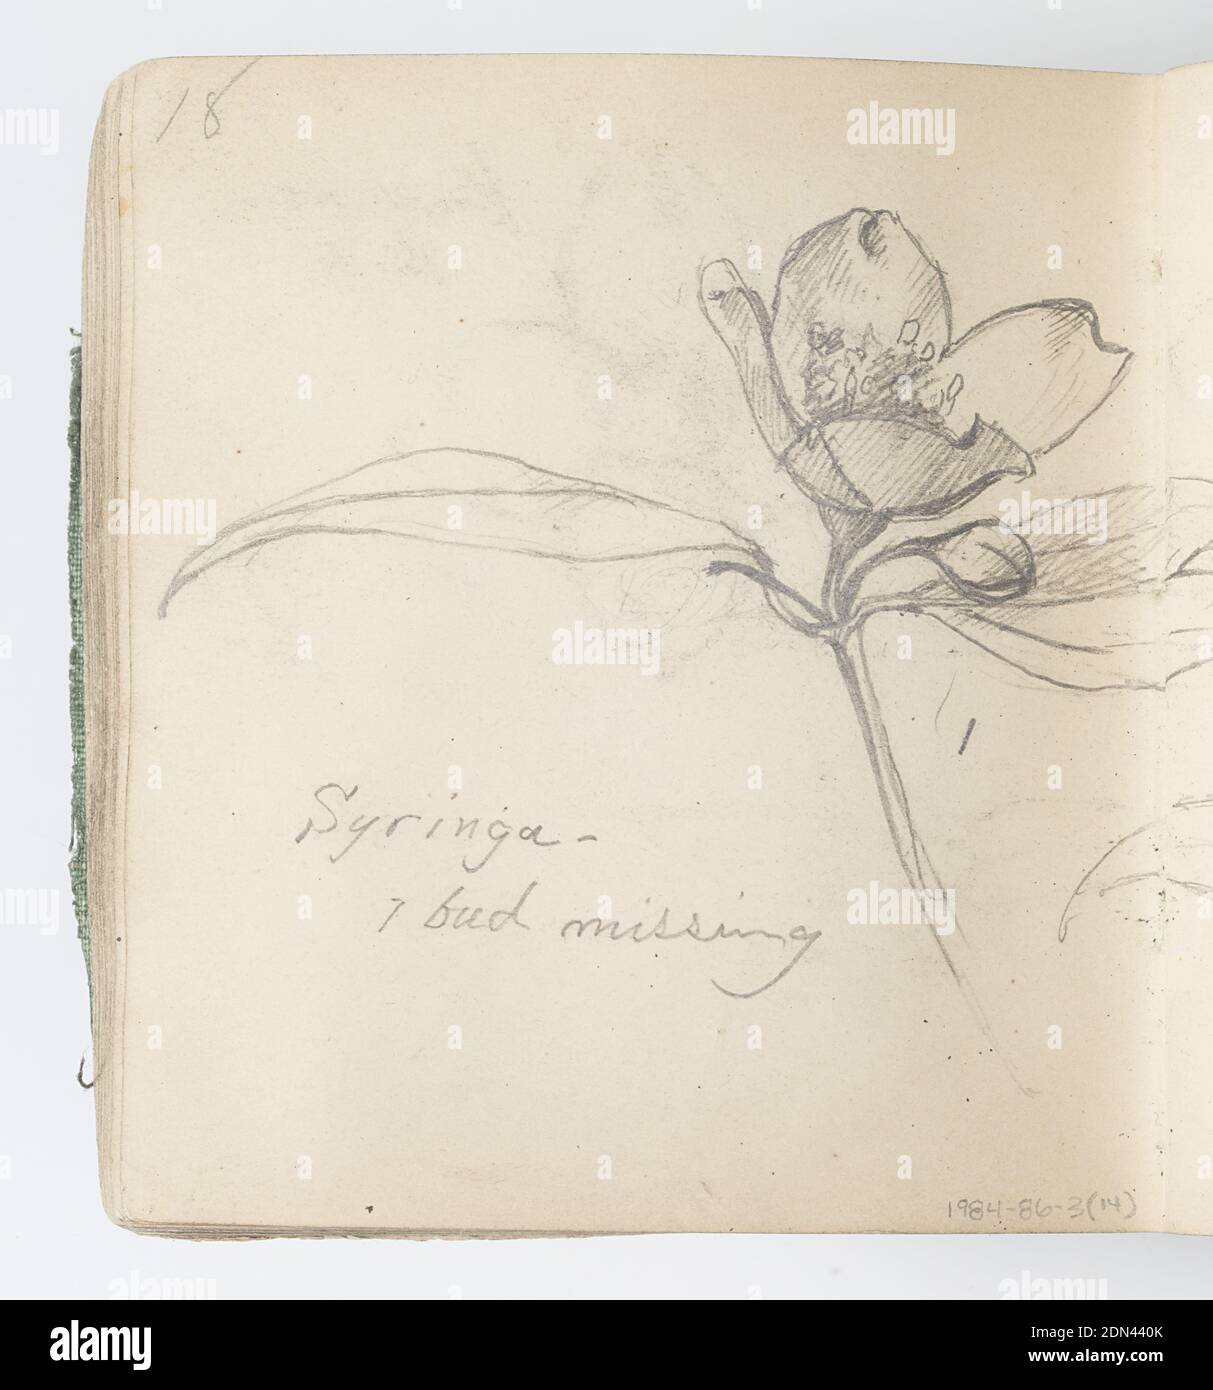 Sketchbook Page: Star of Bethlehem, Kenyon Cox, American, 1856–1919, Graphite on paper, Recto: Studies of the Star of Bethlehem, a flower with six long, pointed petals; full plant shown as well as flower from the top, in profile, and as a closed bud., Verso: Sketch of open flower with bud, two leaves, and stem., USA, 1874, albums (bound) & books, Sketchbook folio, Sketchbook folio Stock Photo